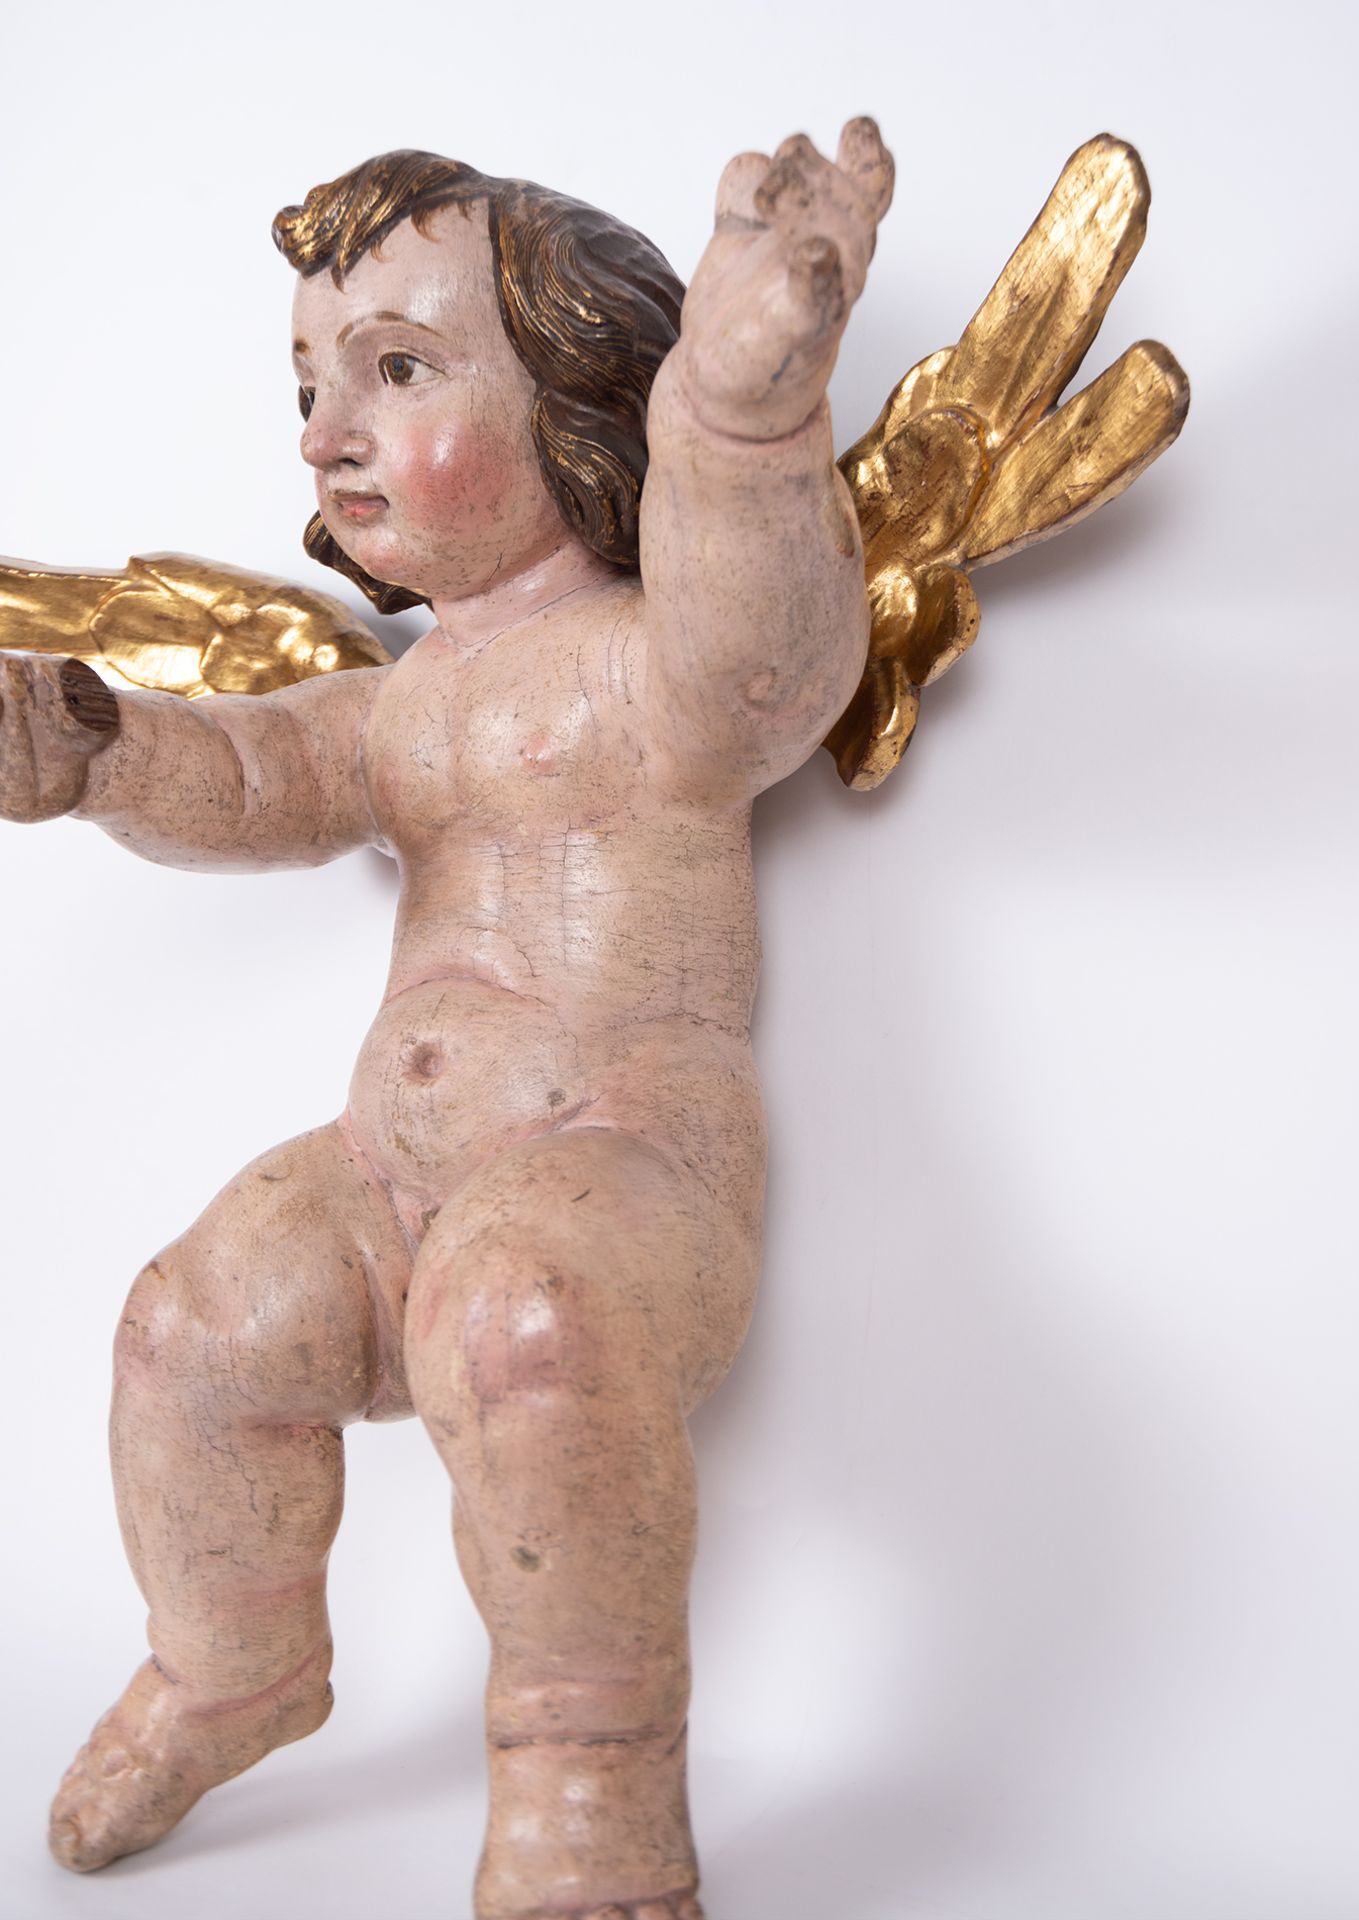 Pair of Wall Applique Angels, Portuguese school from the 17th - 18th centuries - Image 5 of 11